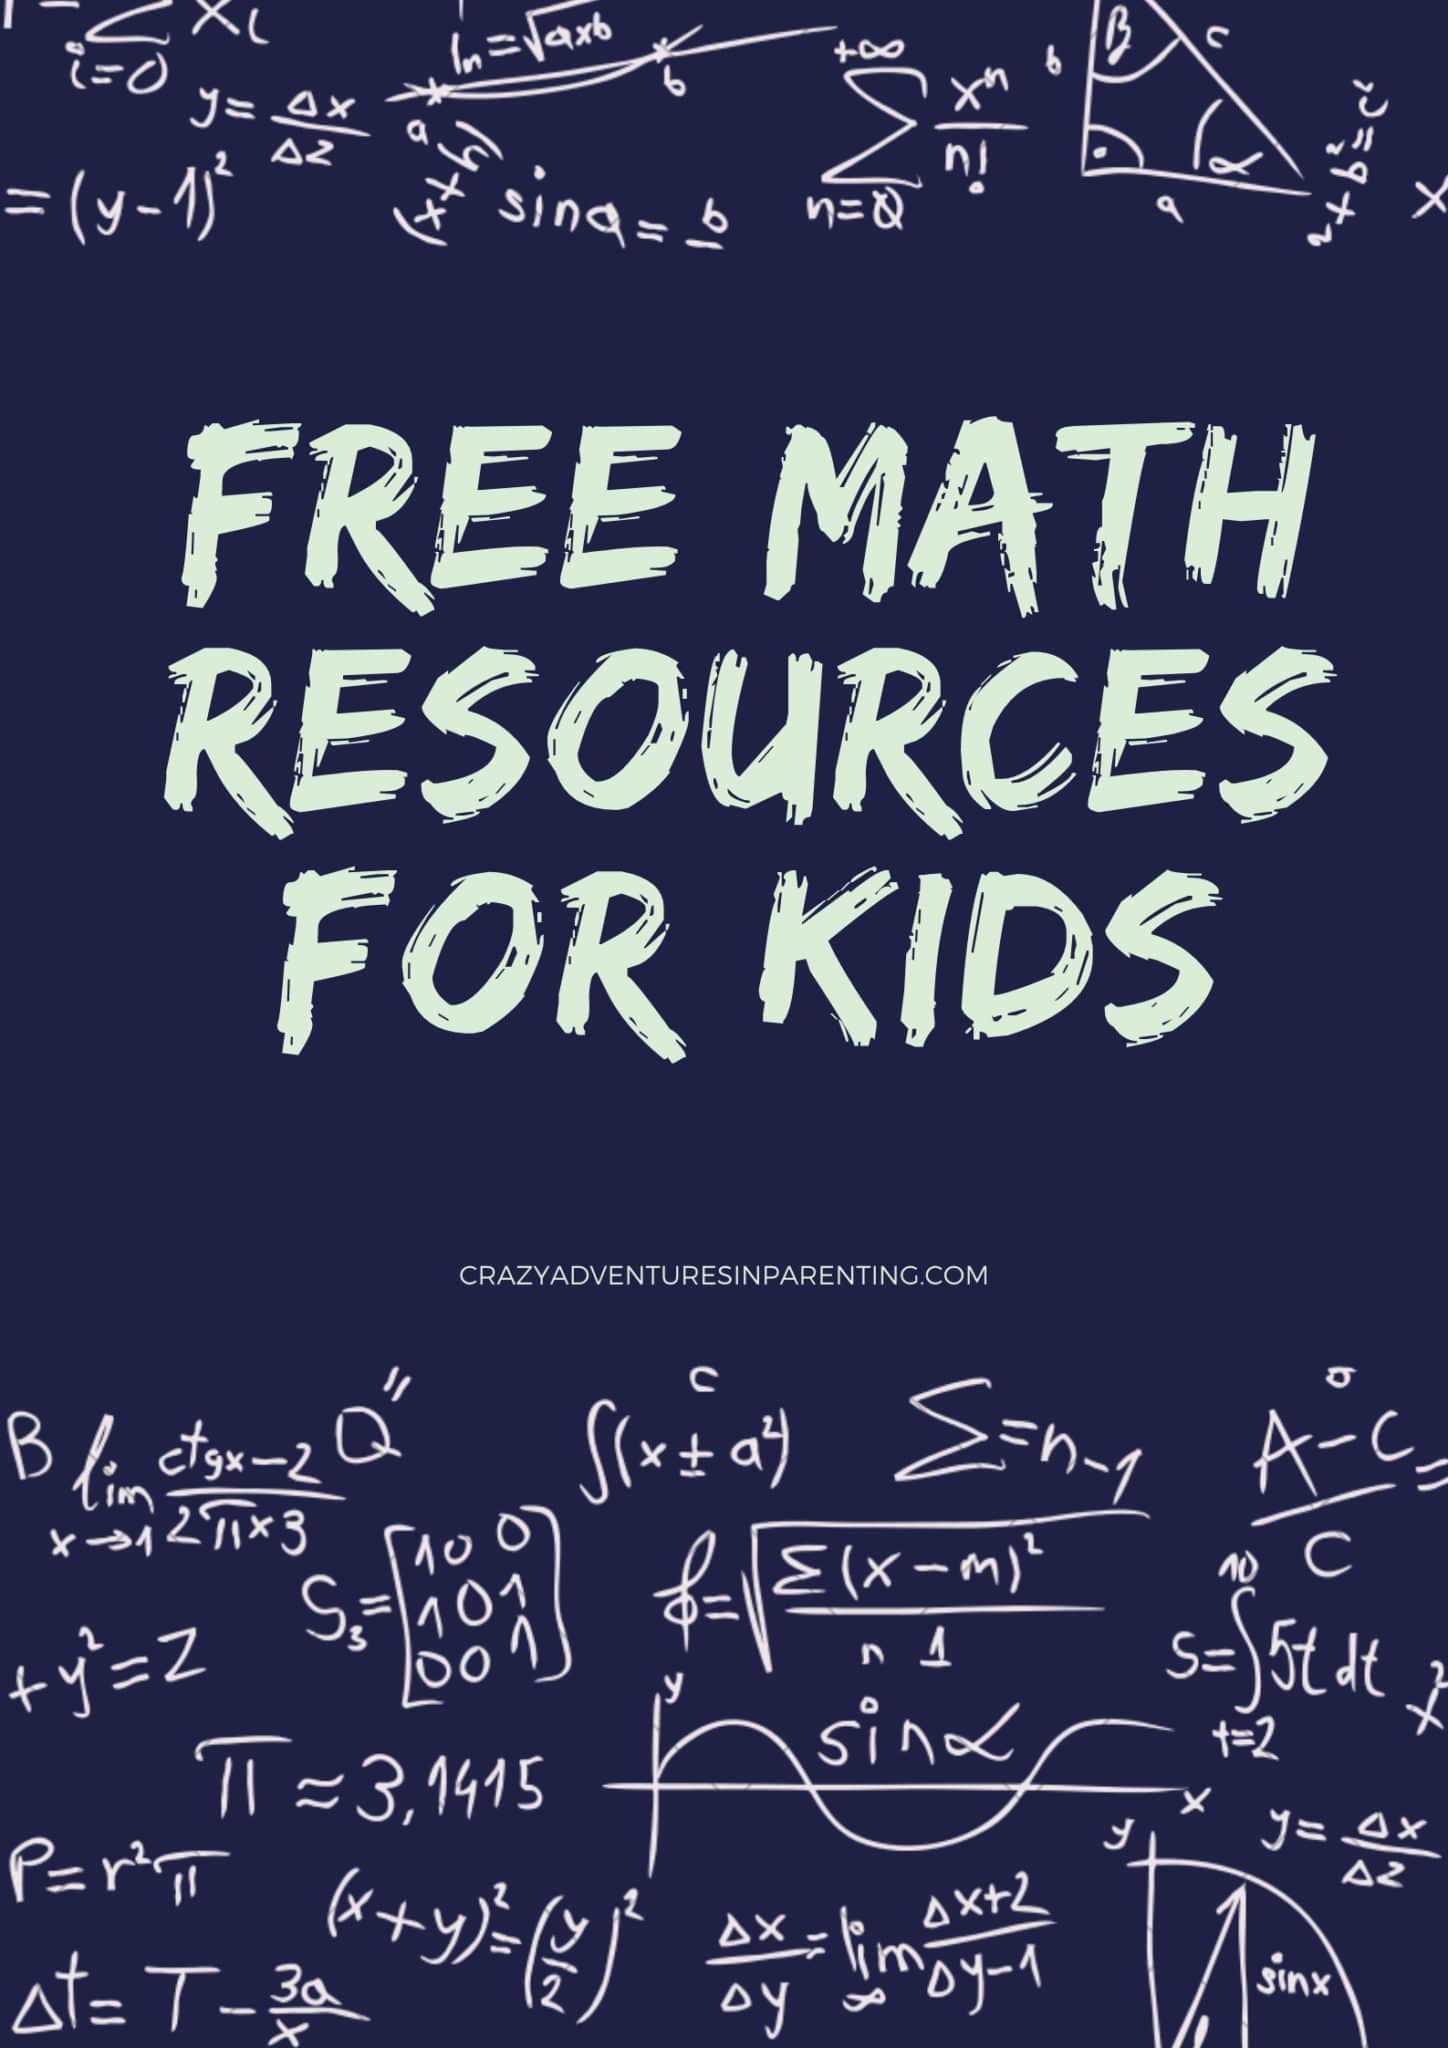 Free Math Resources for Kids